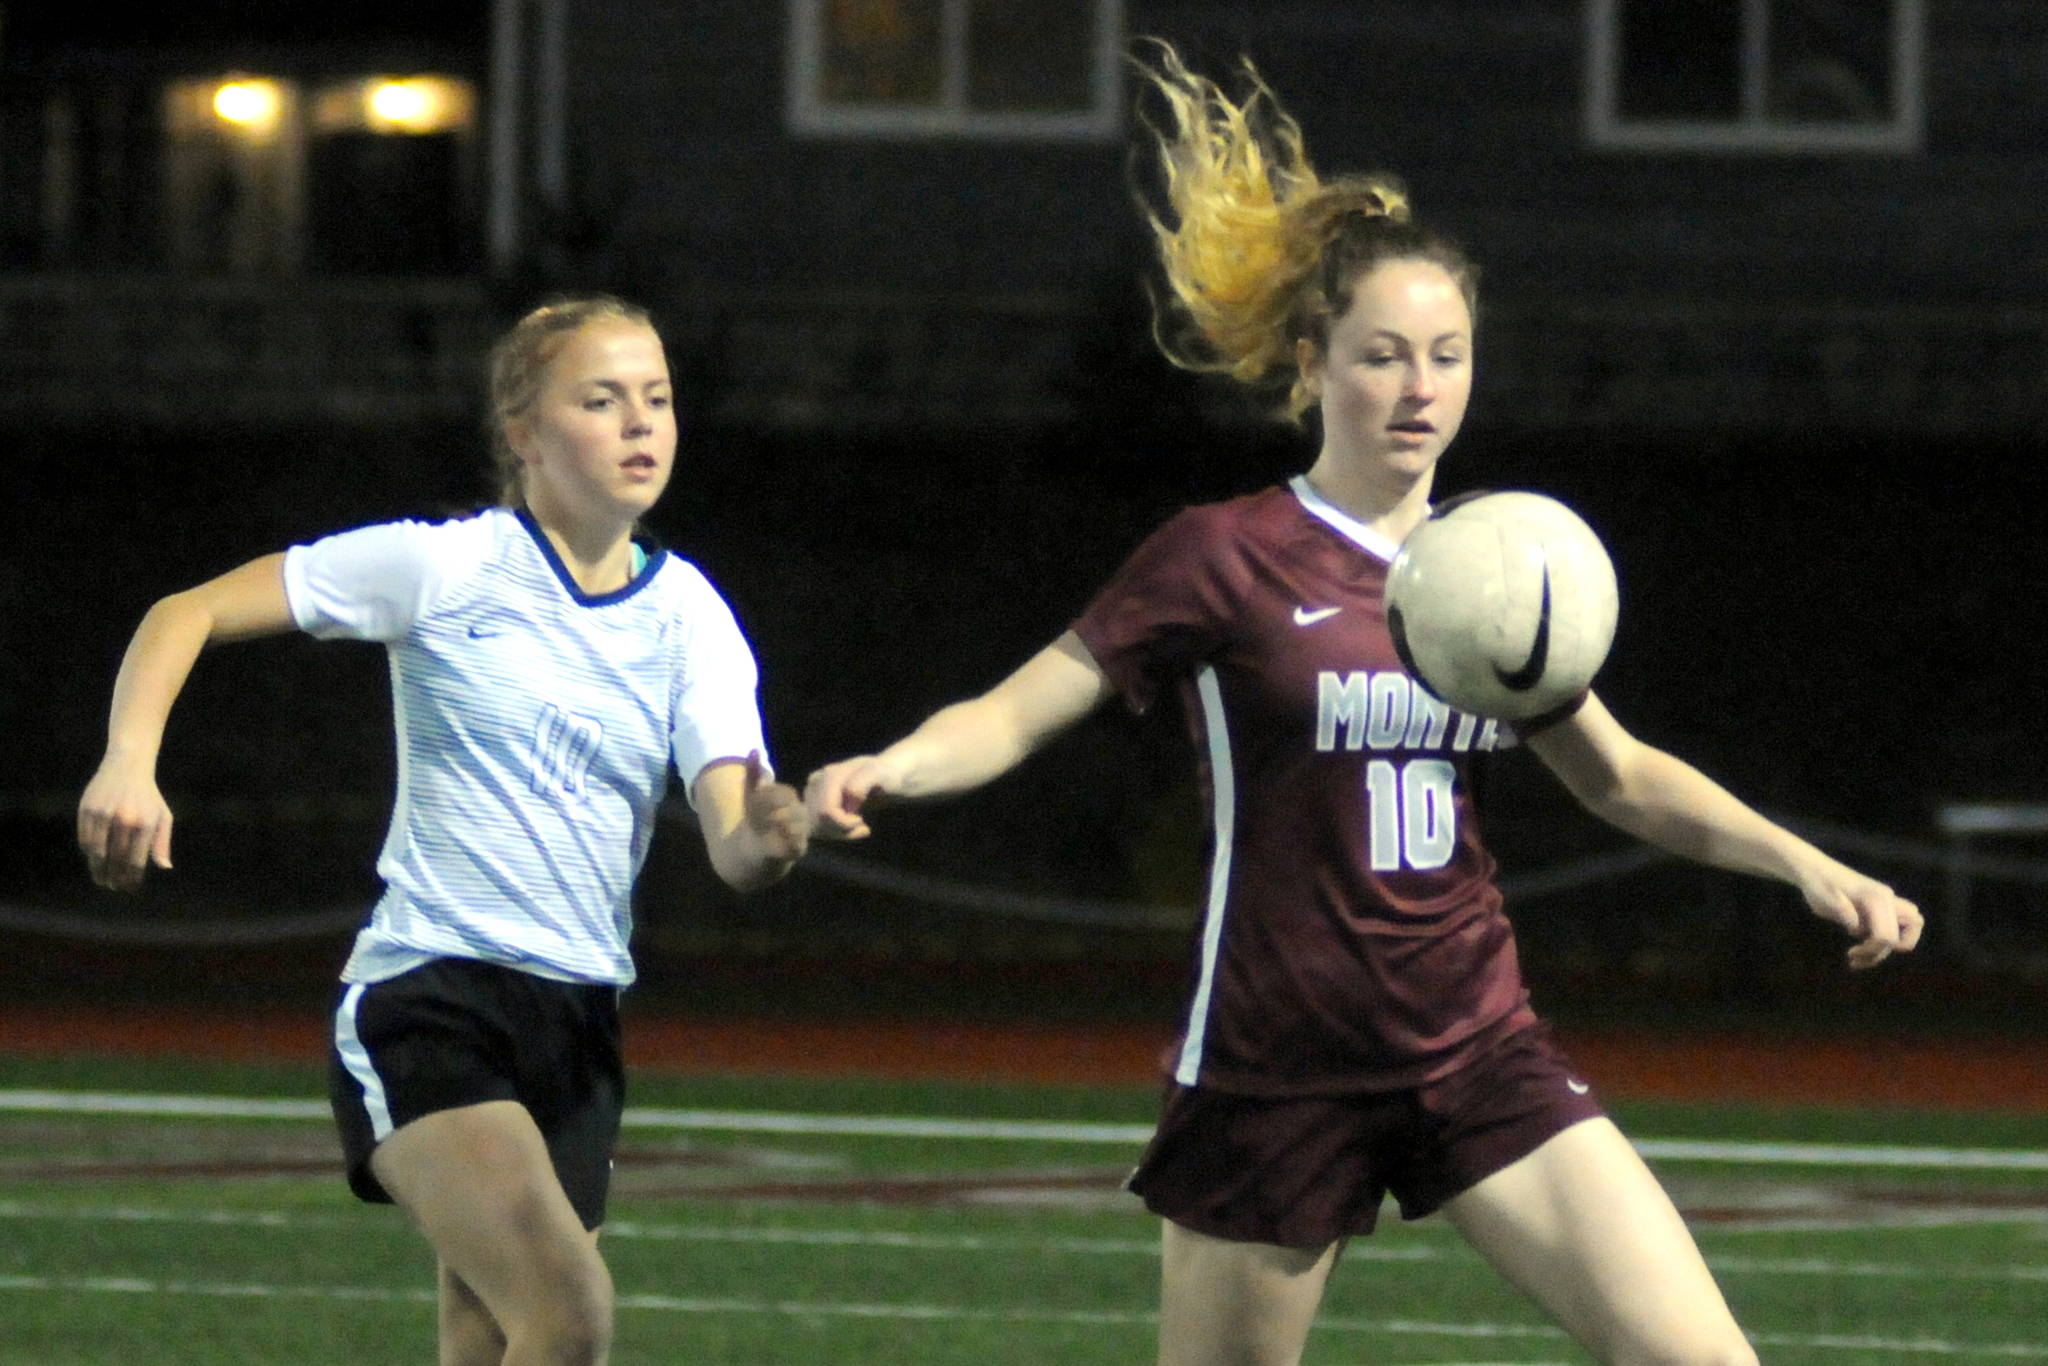 Montesano’s season ends with state-playoff loss